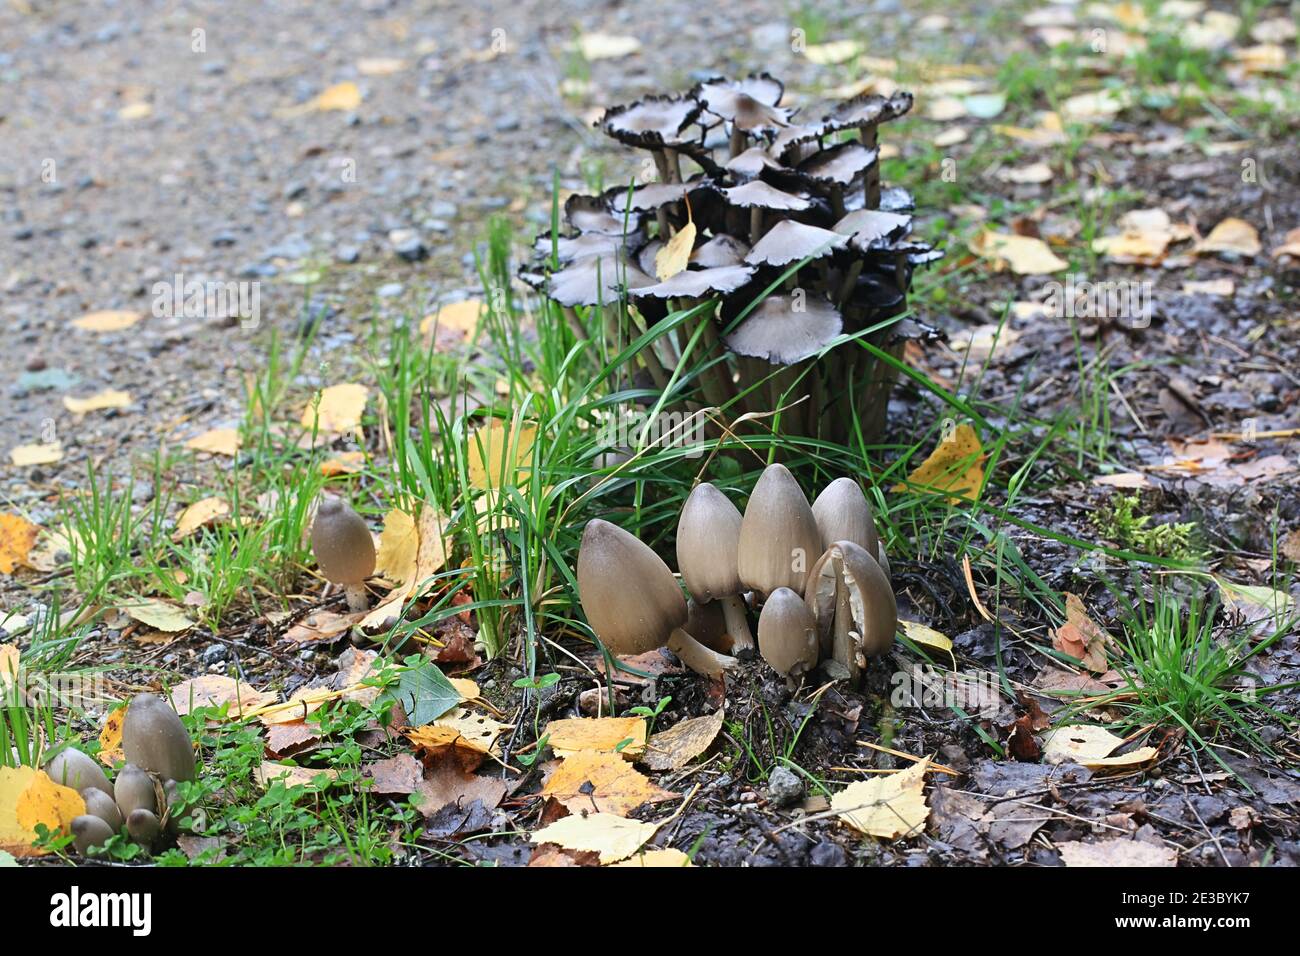 Coprinopsis acuminata, also called Coprinus acuminatus, commonly known as the humpback inkcap, wild mushroom from Finland Stock Photo